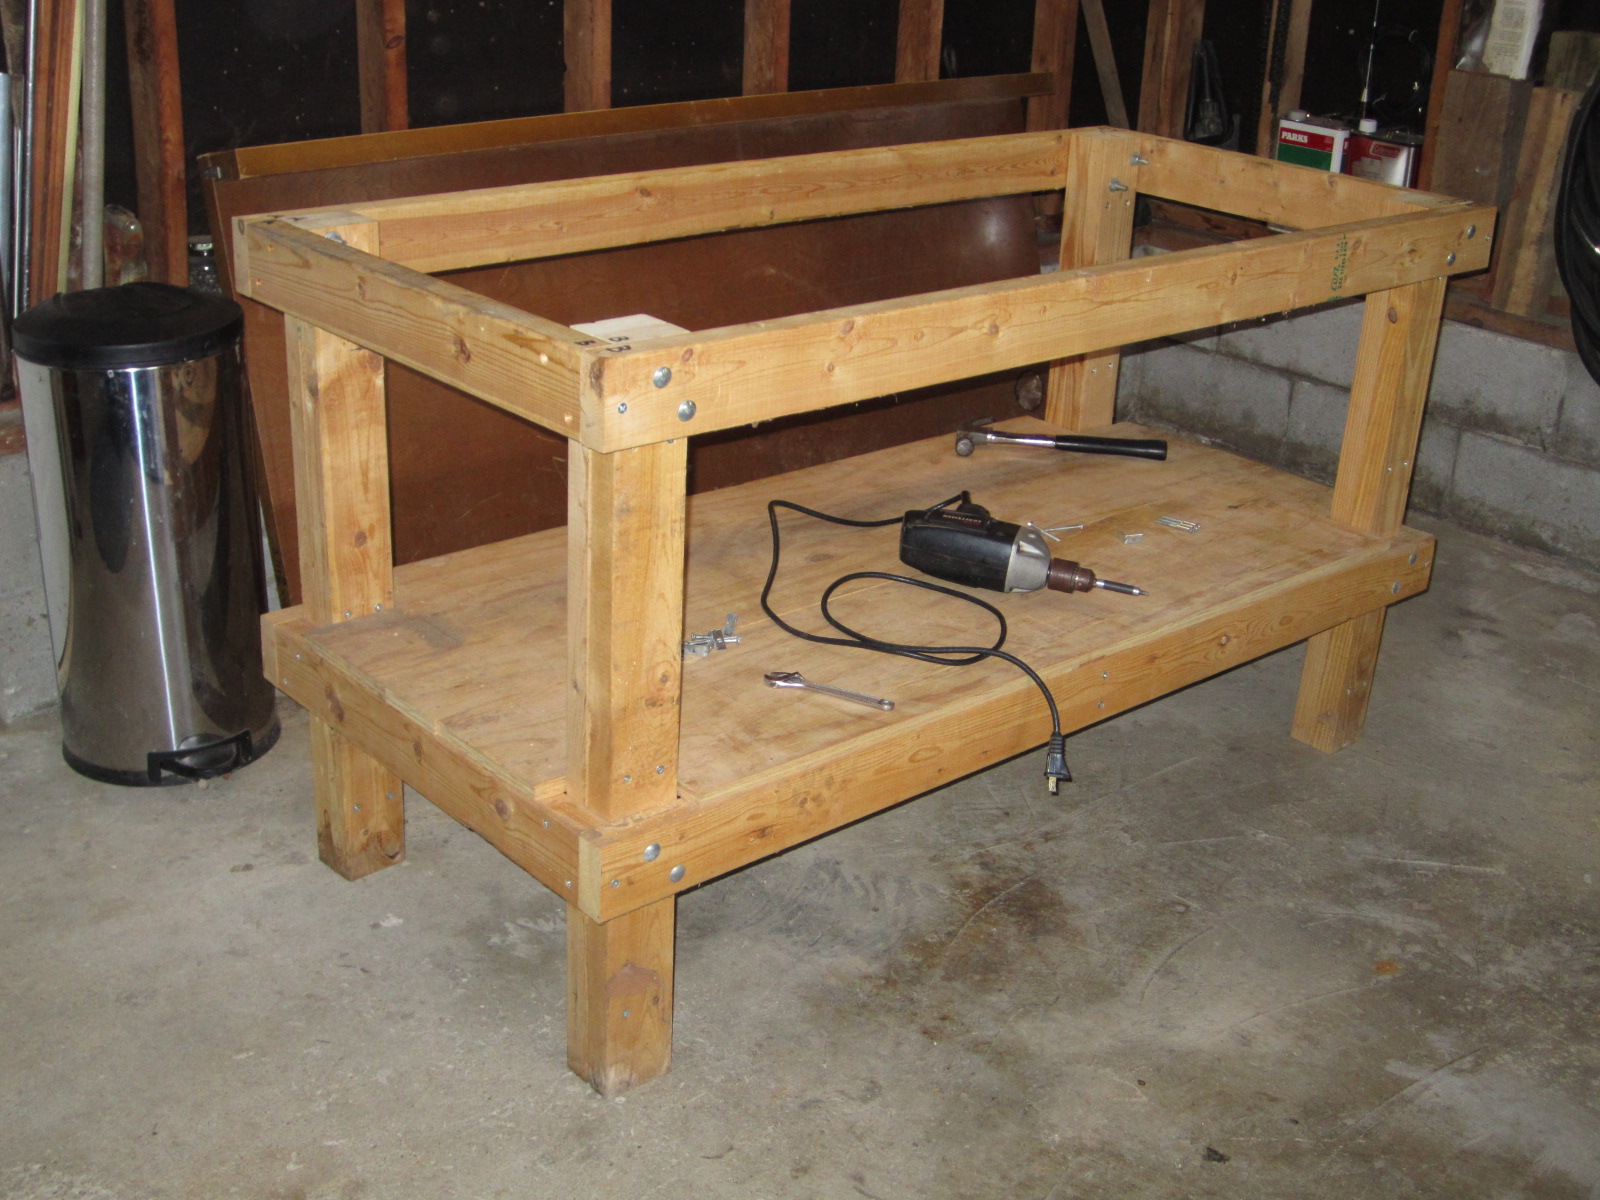 Trying to build a bench - Woodworking Talk - Woodworkers Forum